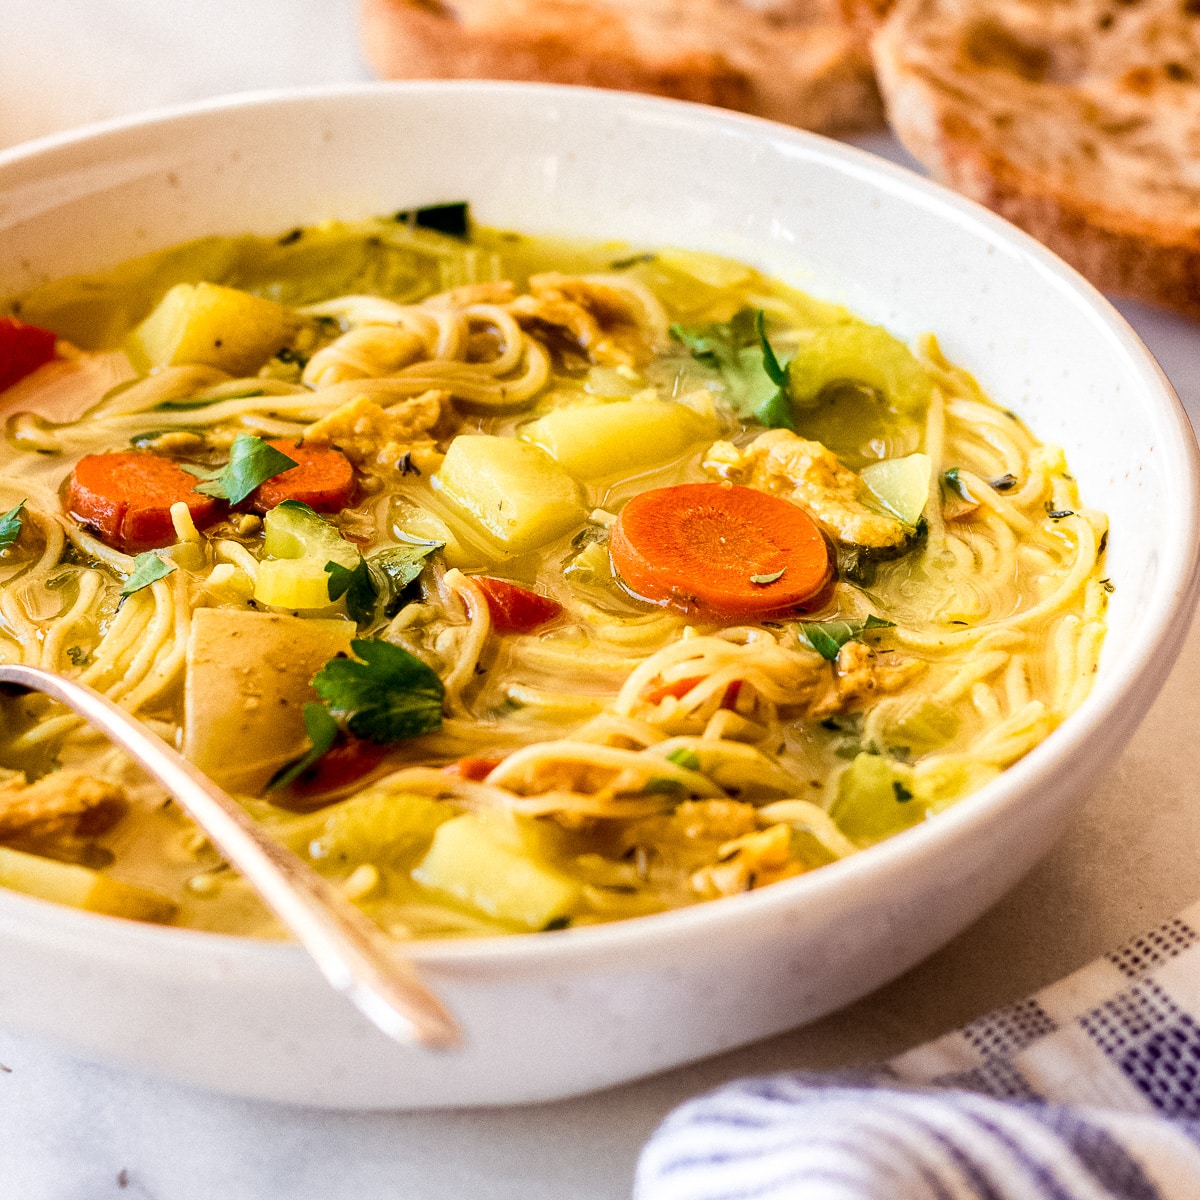 https://vancouverwithlove.com/wp-content/uploads/2023/06/vegan-chicken-noodle-soup-featured.jpg